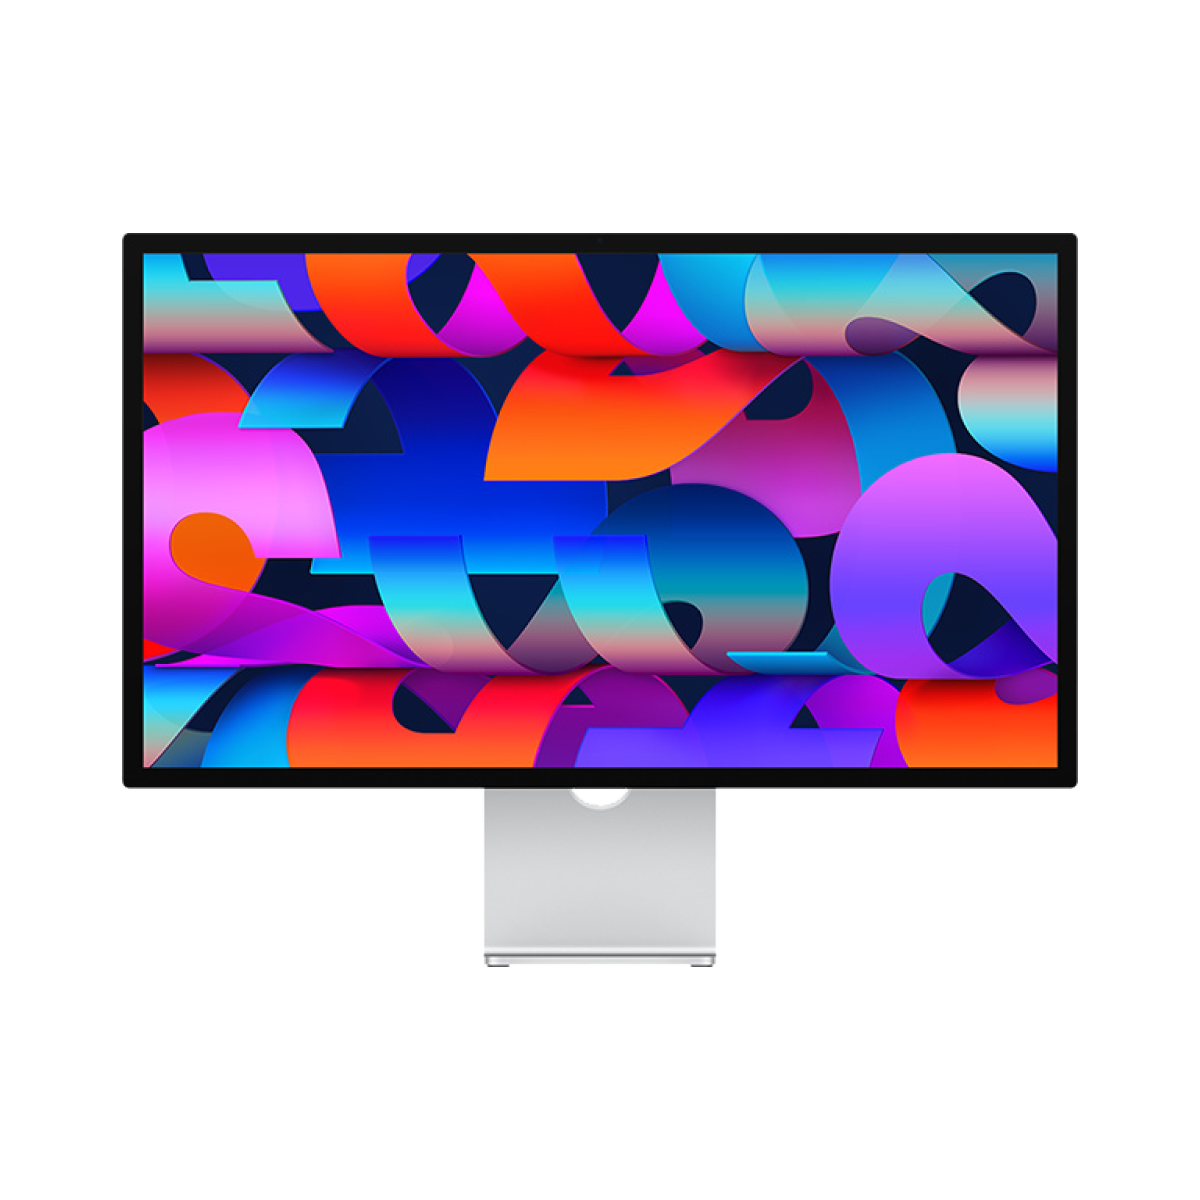 Large silver retina display monitor from Apple